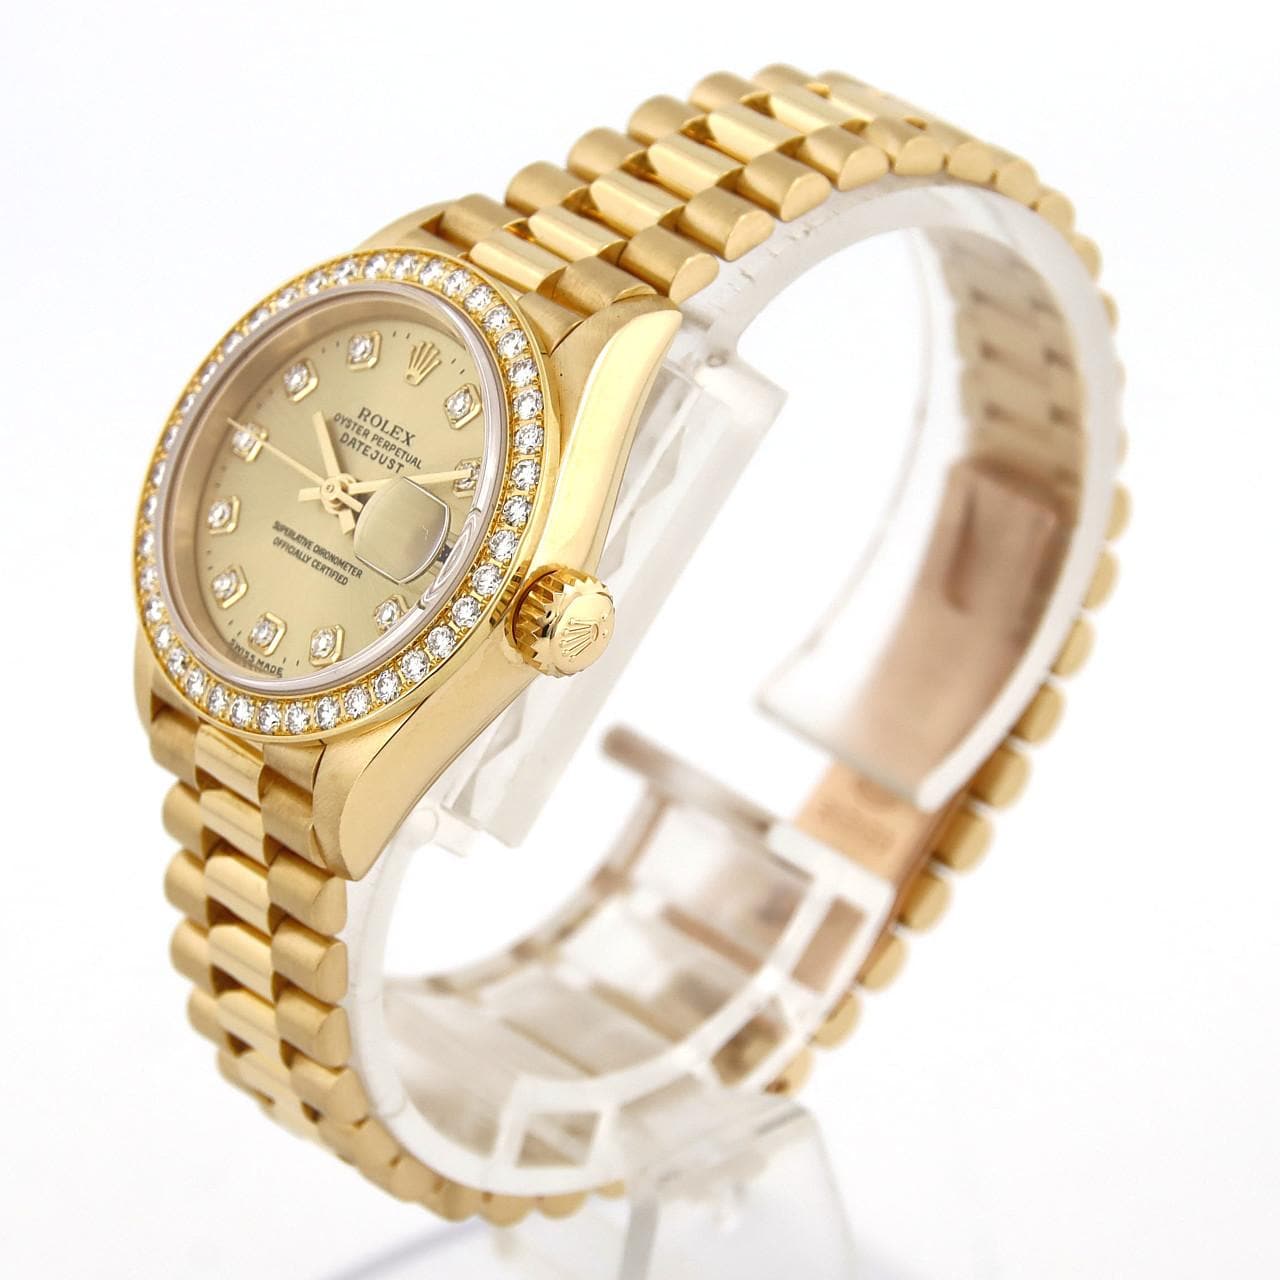 ROLEX Datejust 69138G YG Automatic W number